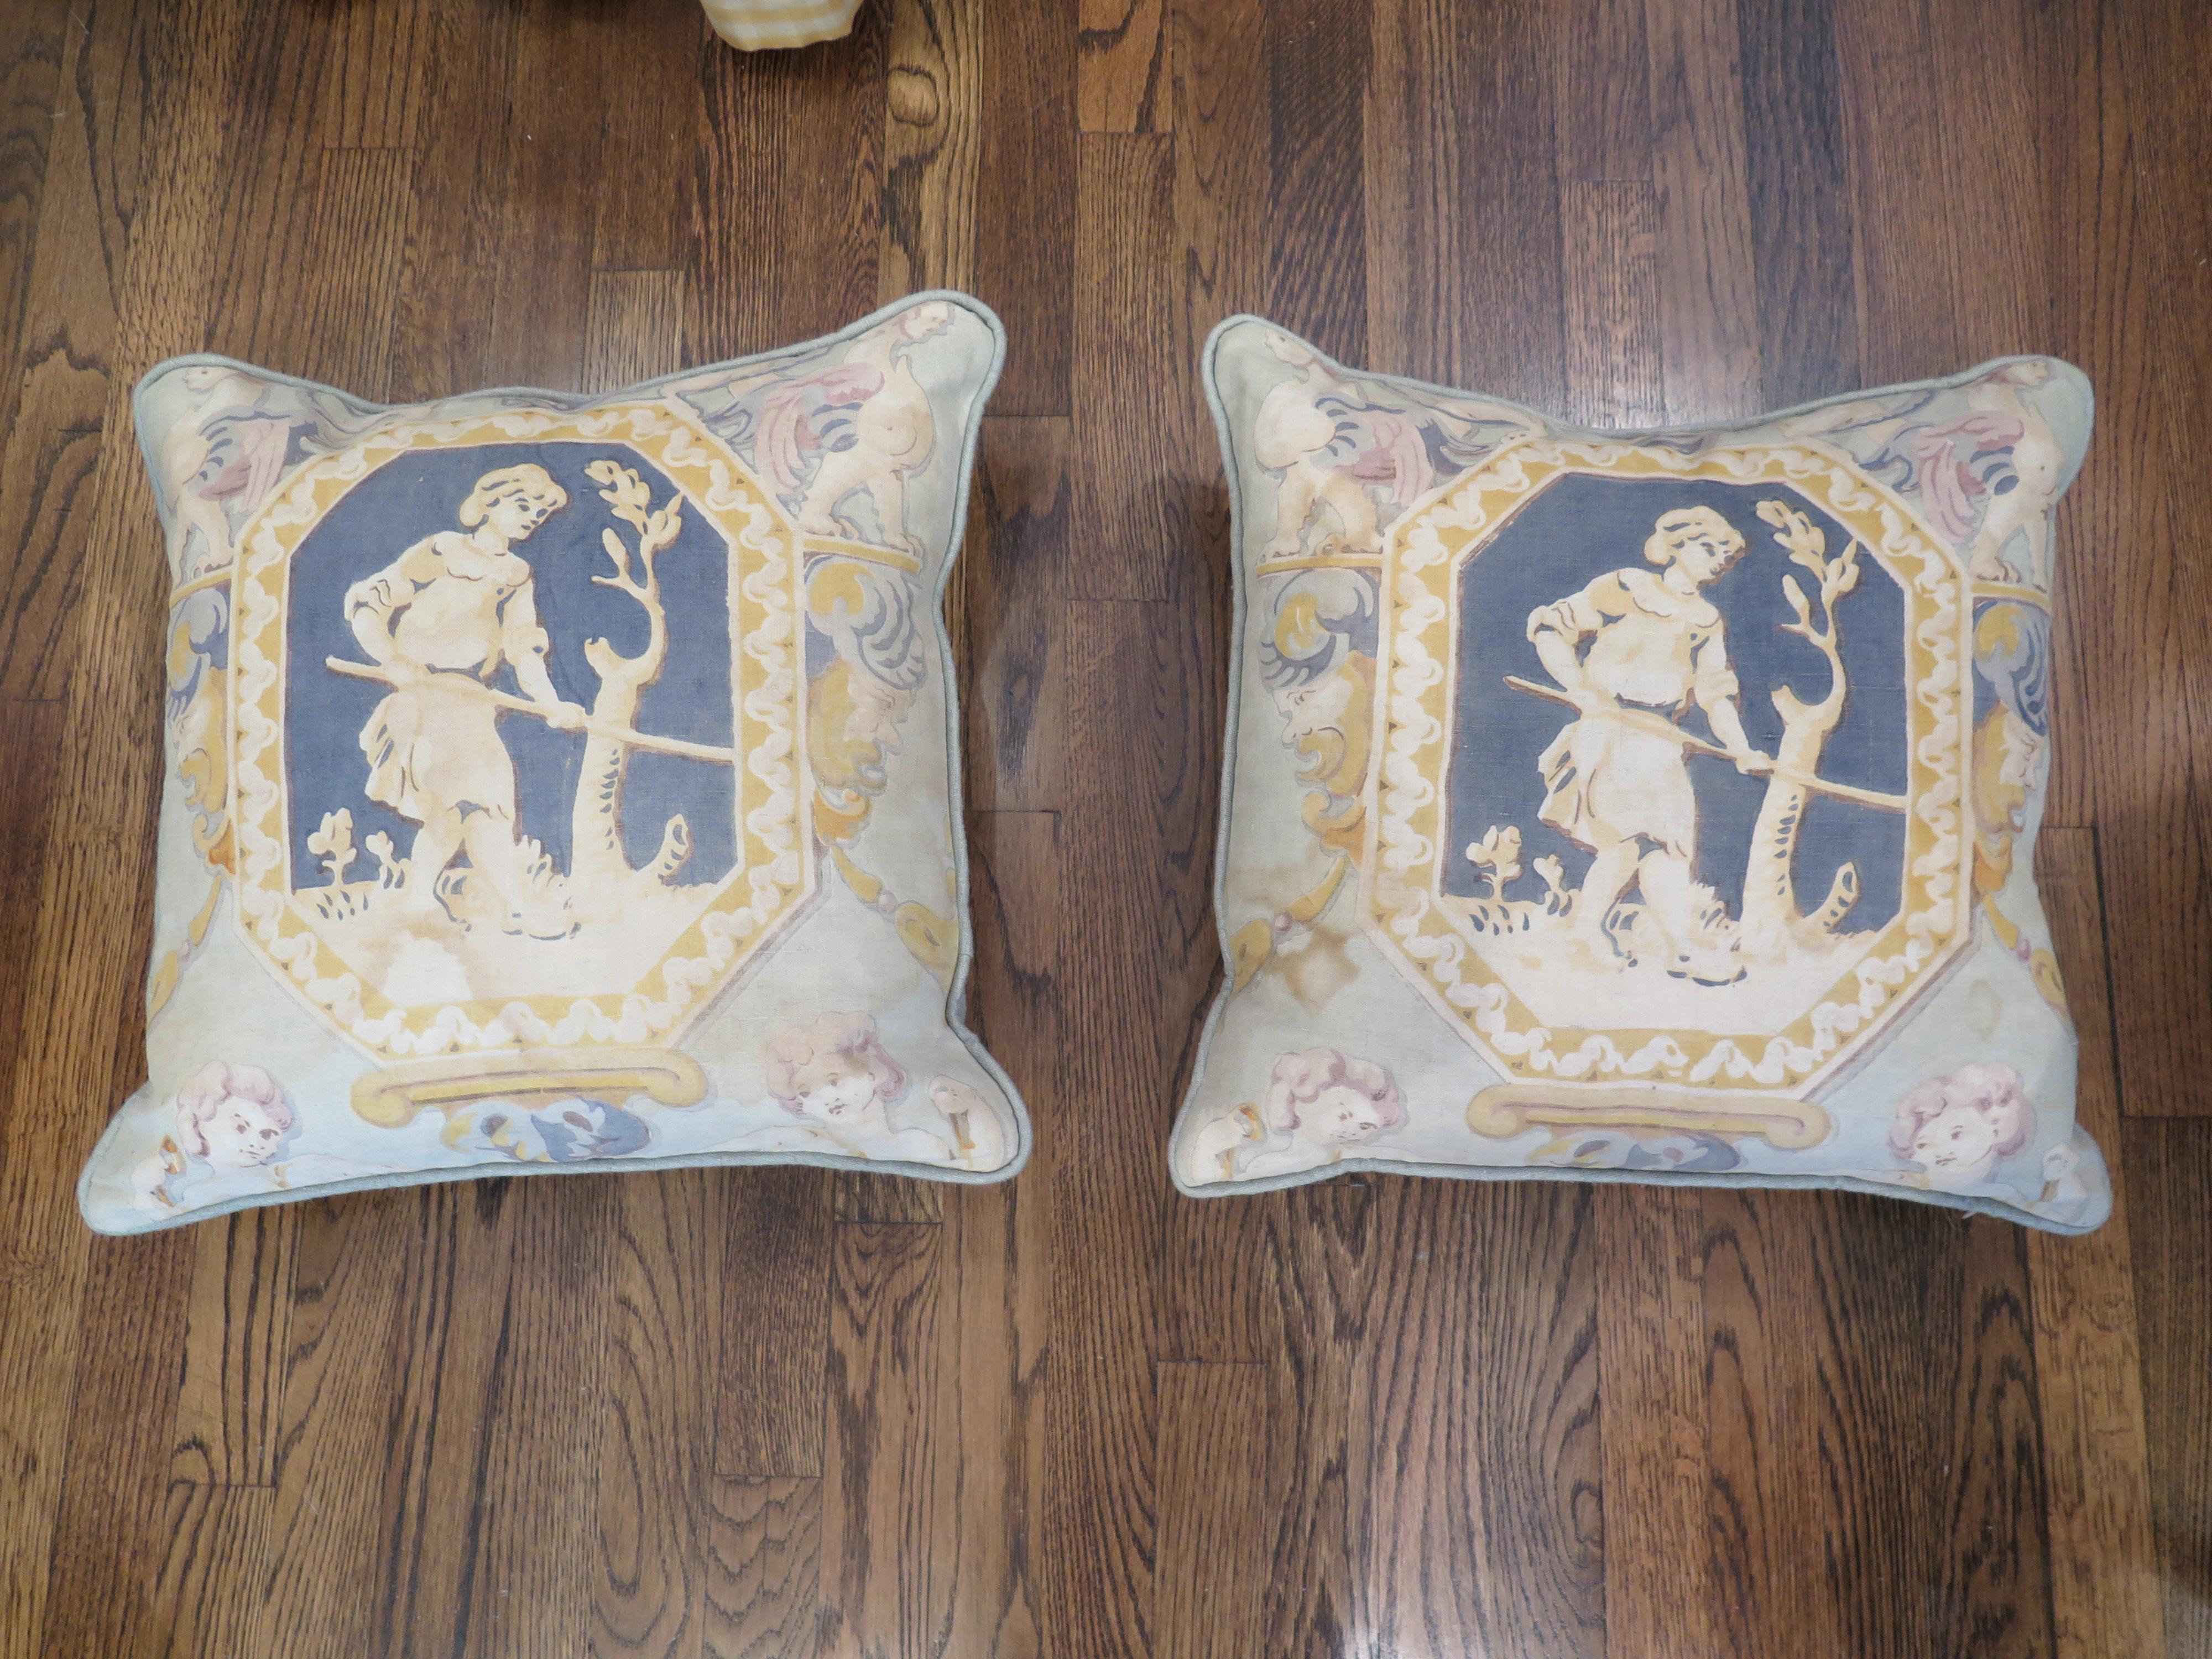 Pair of pillows made from vintage linen panels from the 1920s. Pillows have zippers. Down filled.